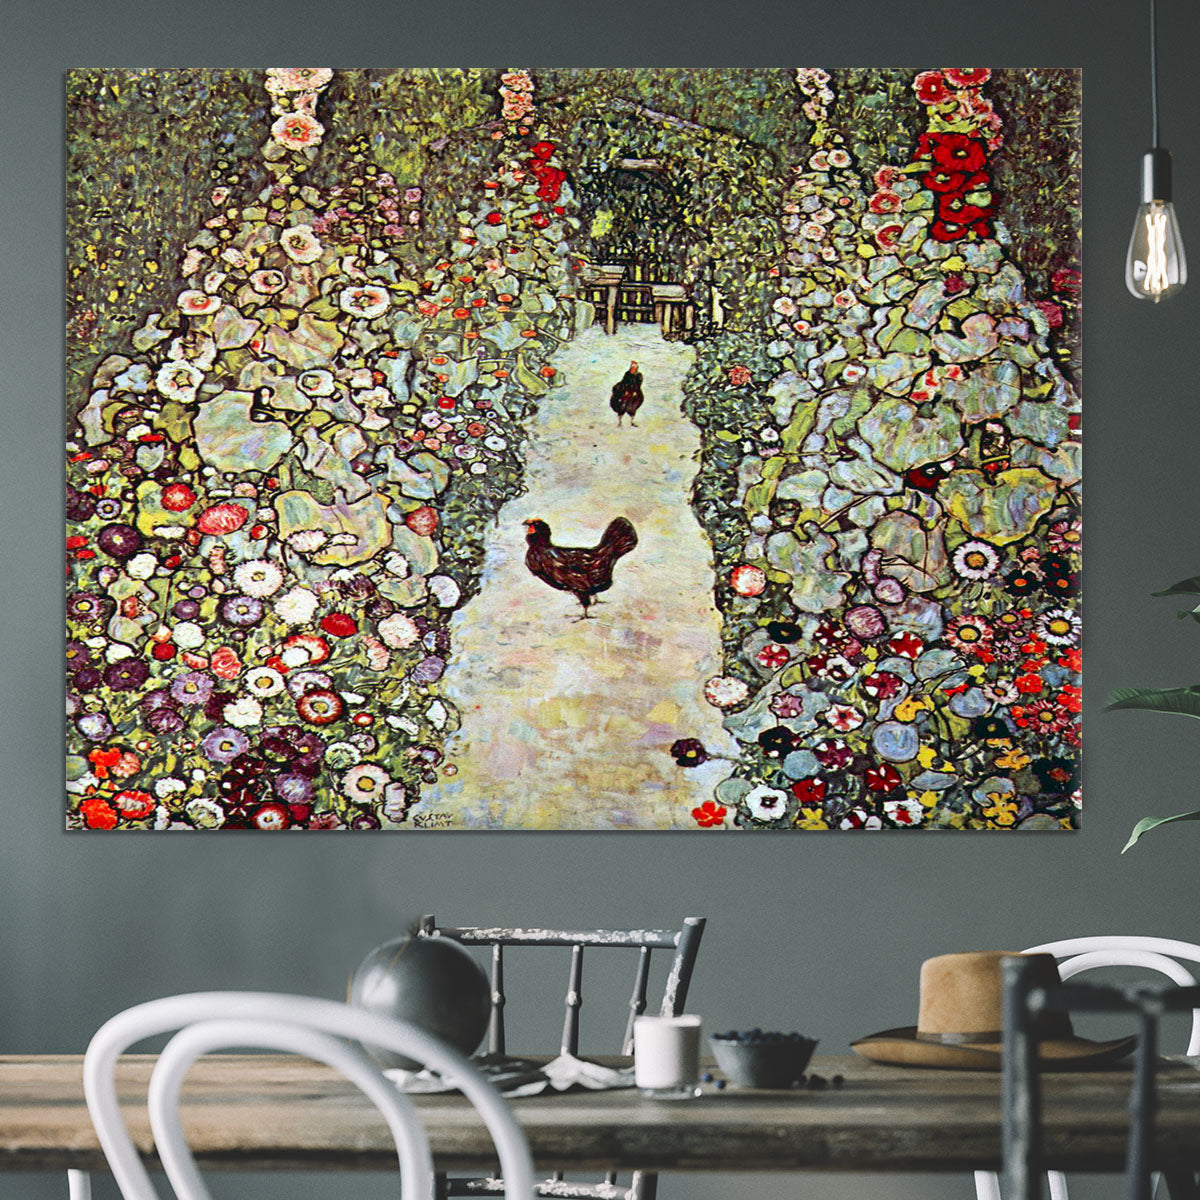 Garden Path with Chickens by Klimt Canvas Print or Poster - Canvas Art Rocks - 3